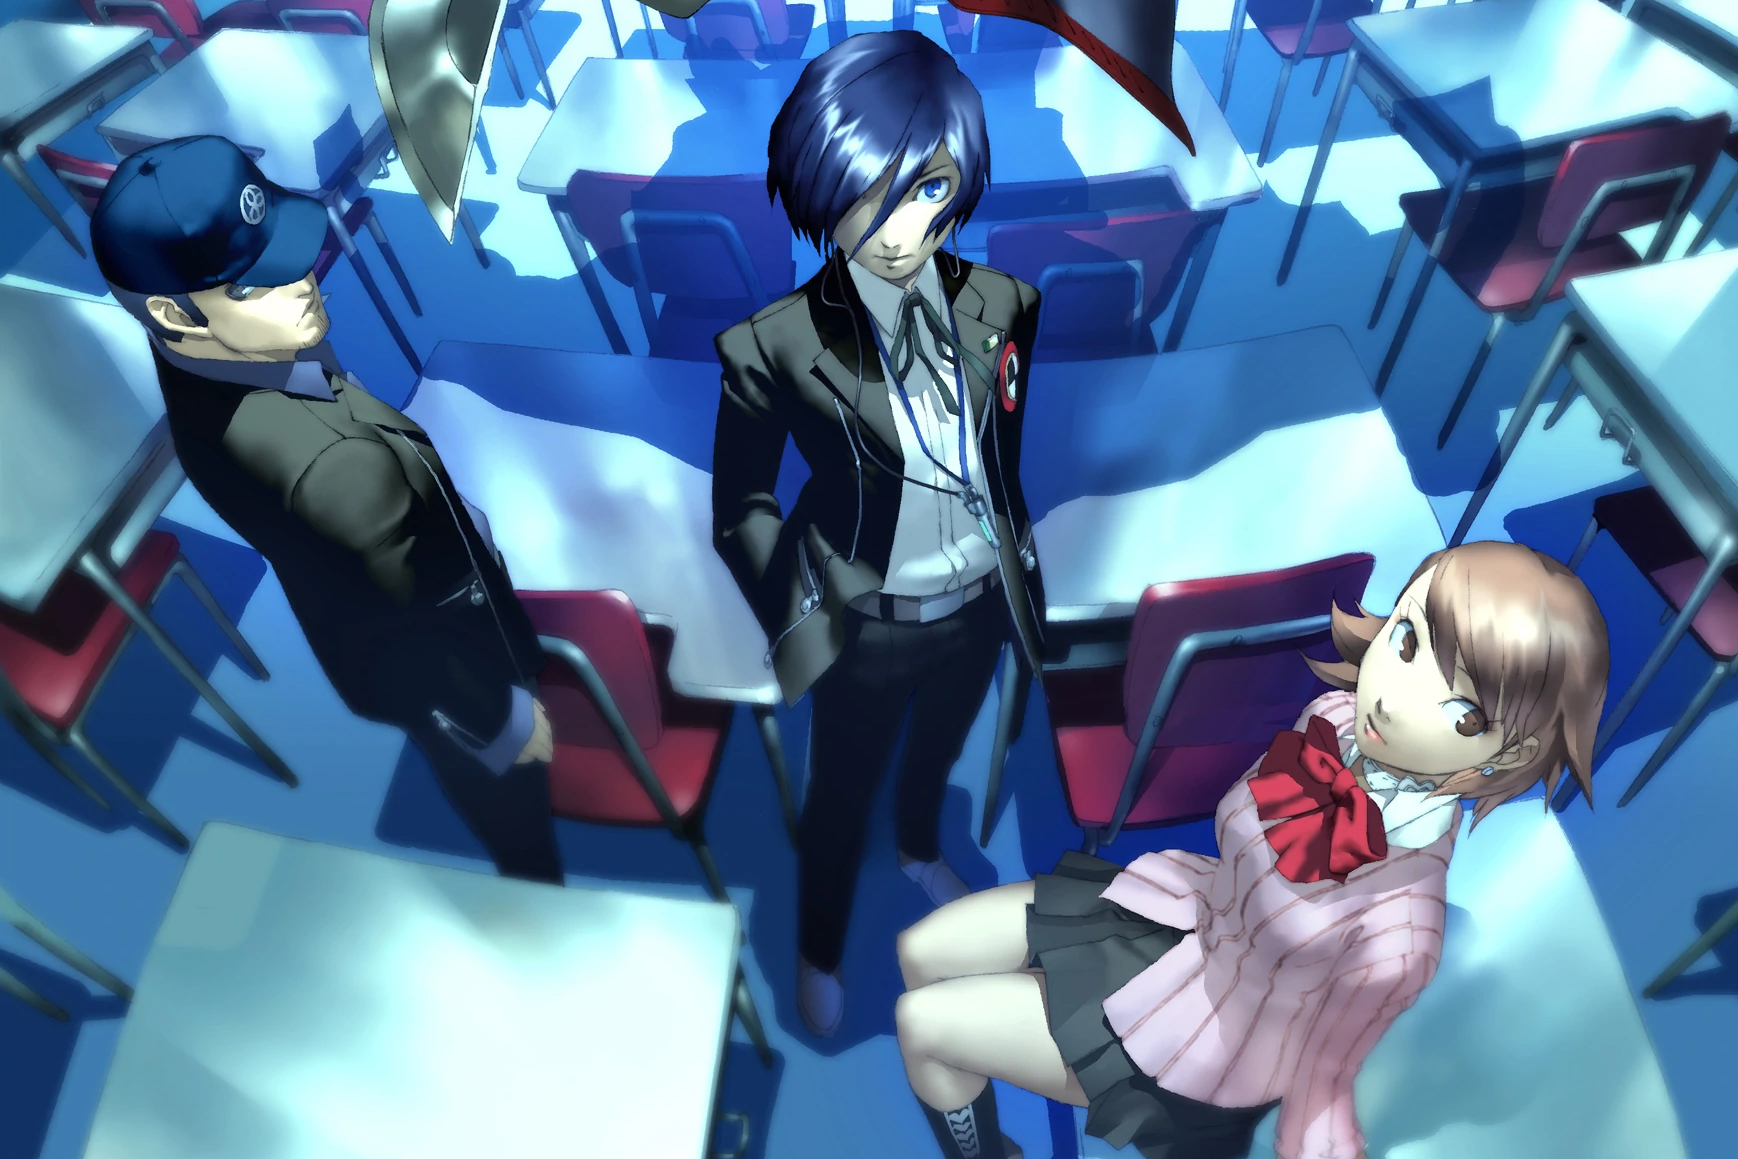 Persona 5 tactics game, Persona 3 remake revealed by Atlus | Nestia